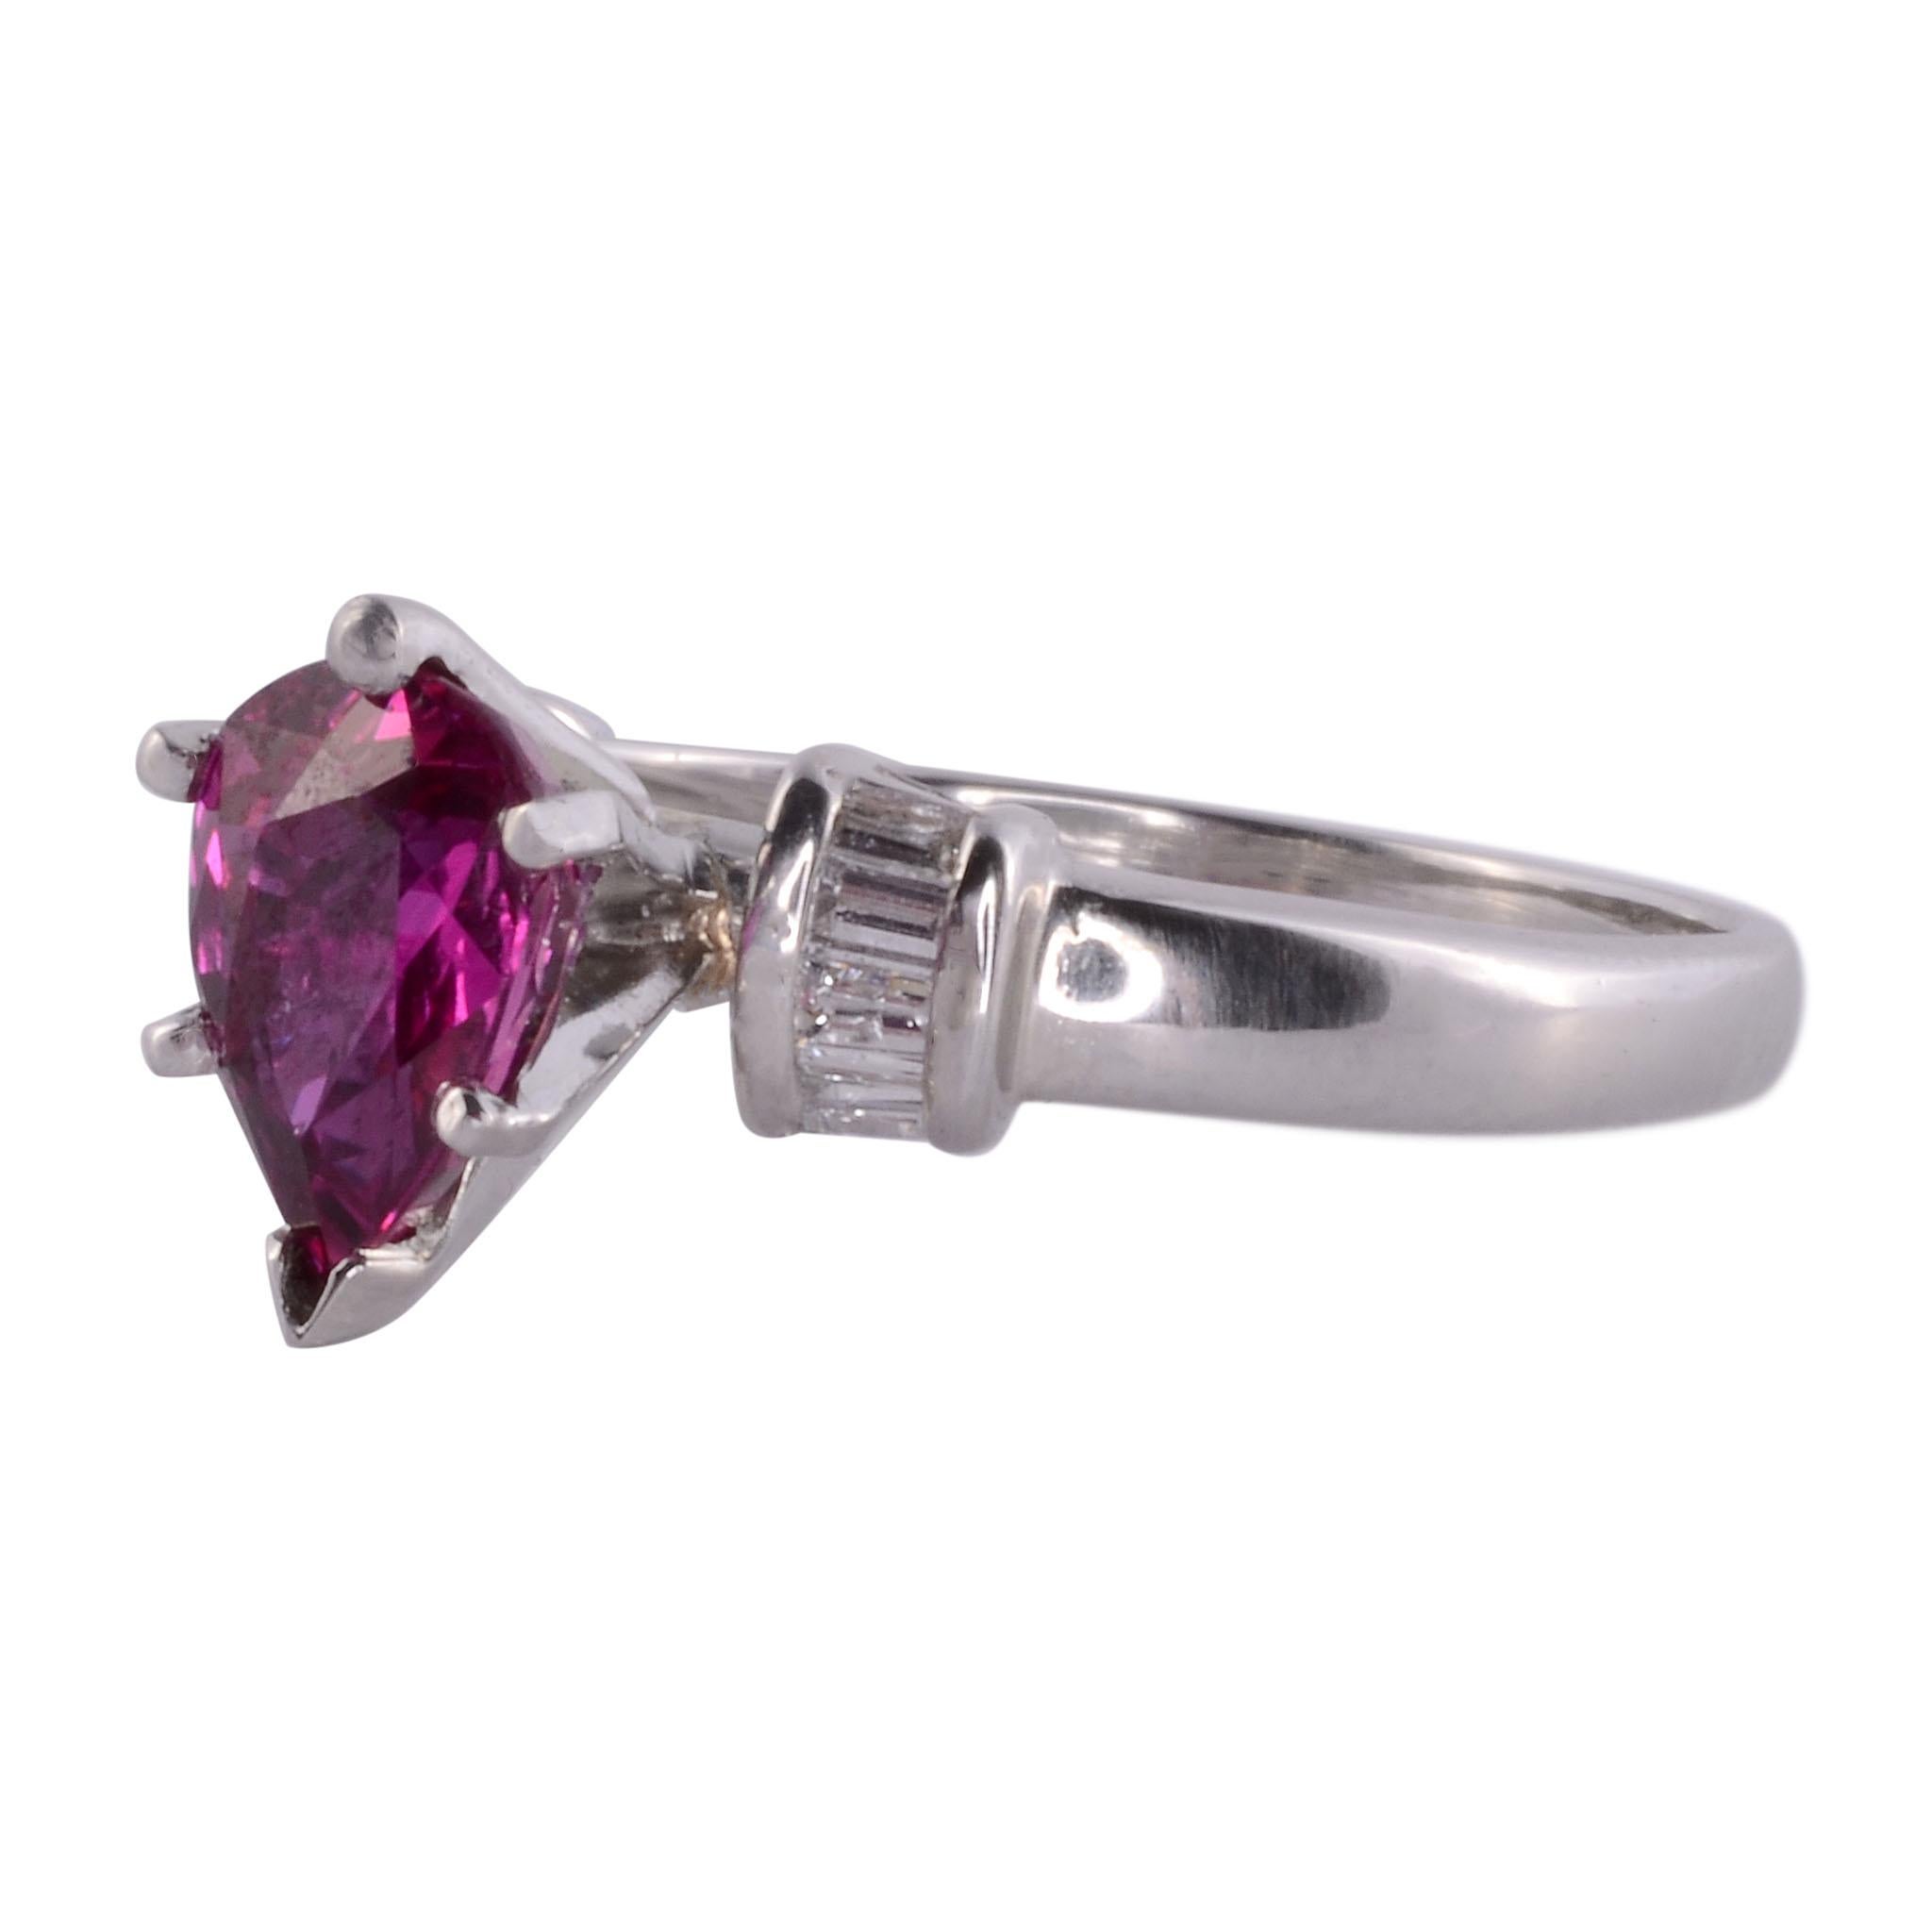 Estate pear ruby diamond platinum ring. This platinum ring features a center pear ruby at 1.61 carats accented with eight baguette cut diamonds at .16 carat total weight. The diamond have SI1 clarity and H-I color and is a size 7.75. This pear ruby